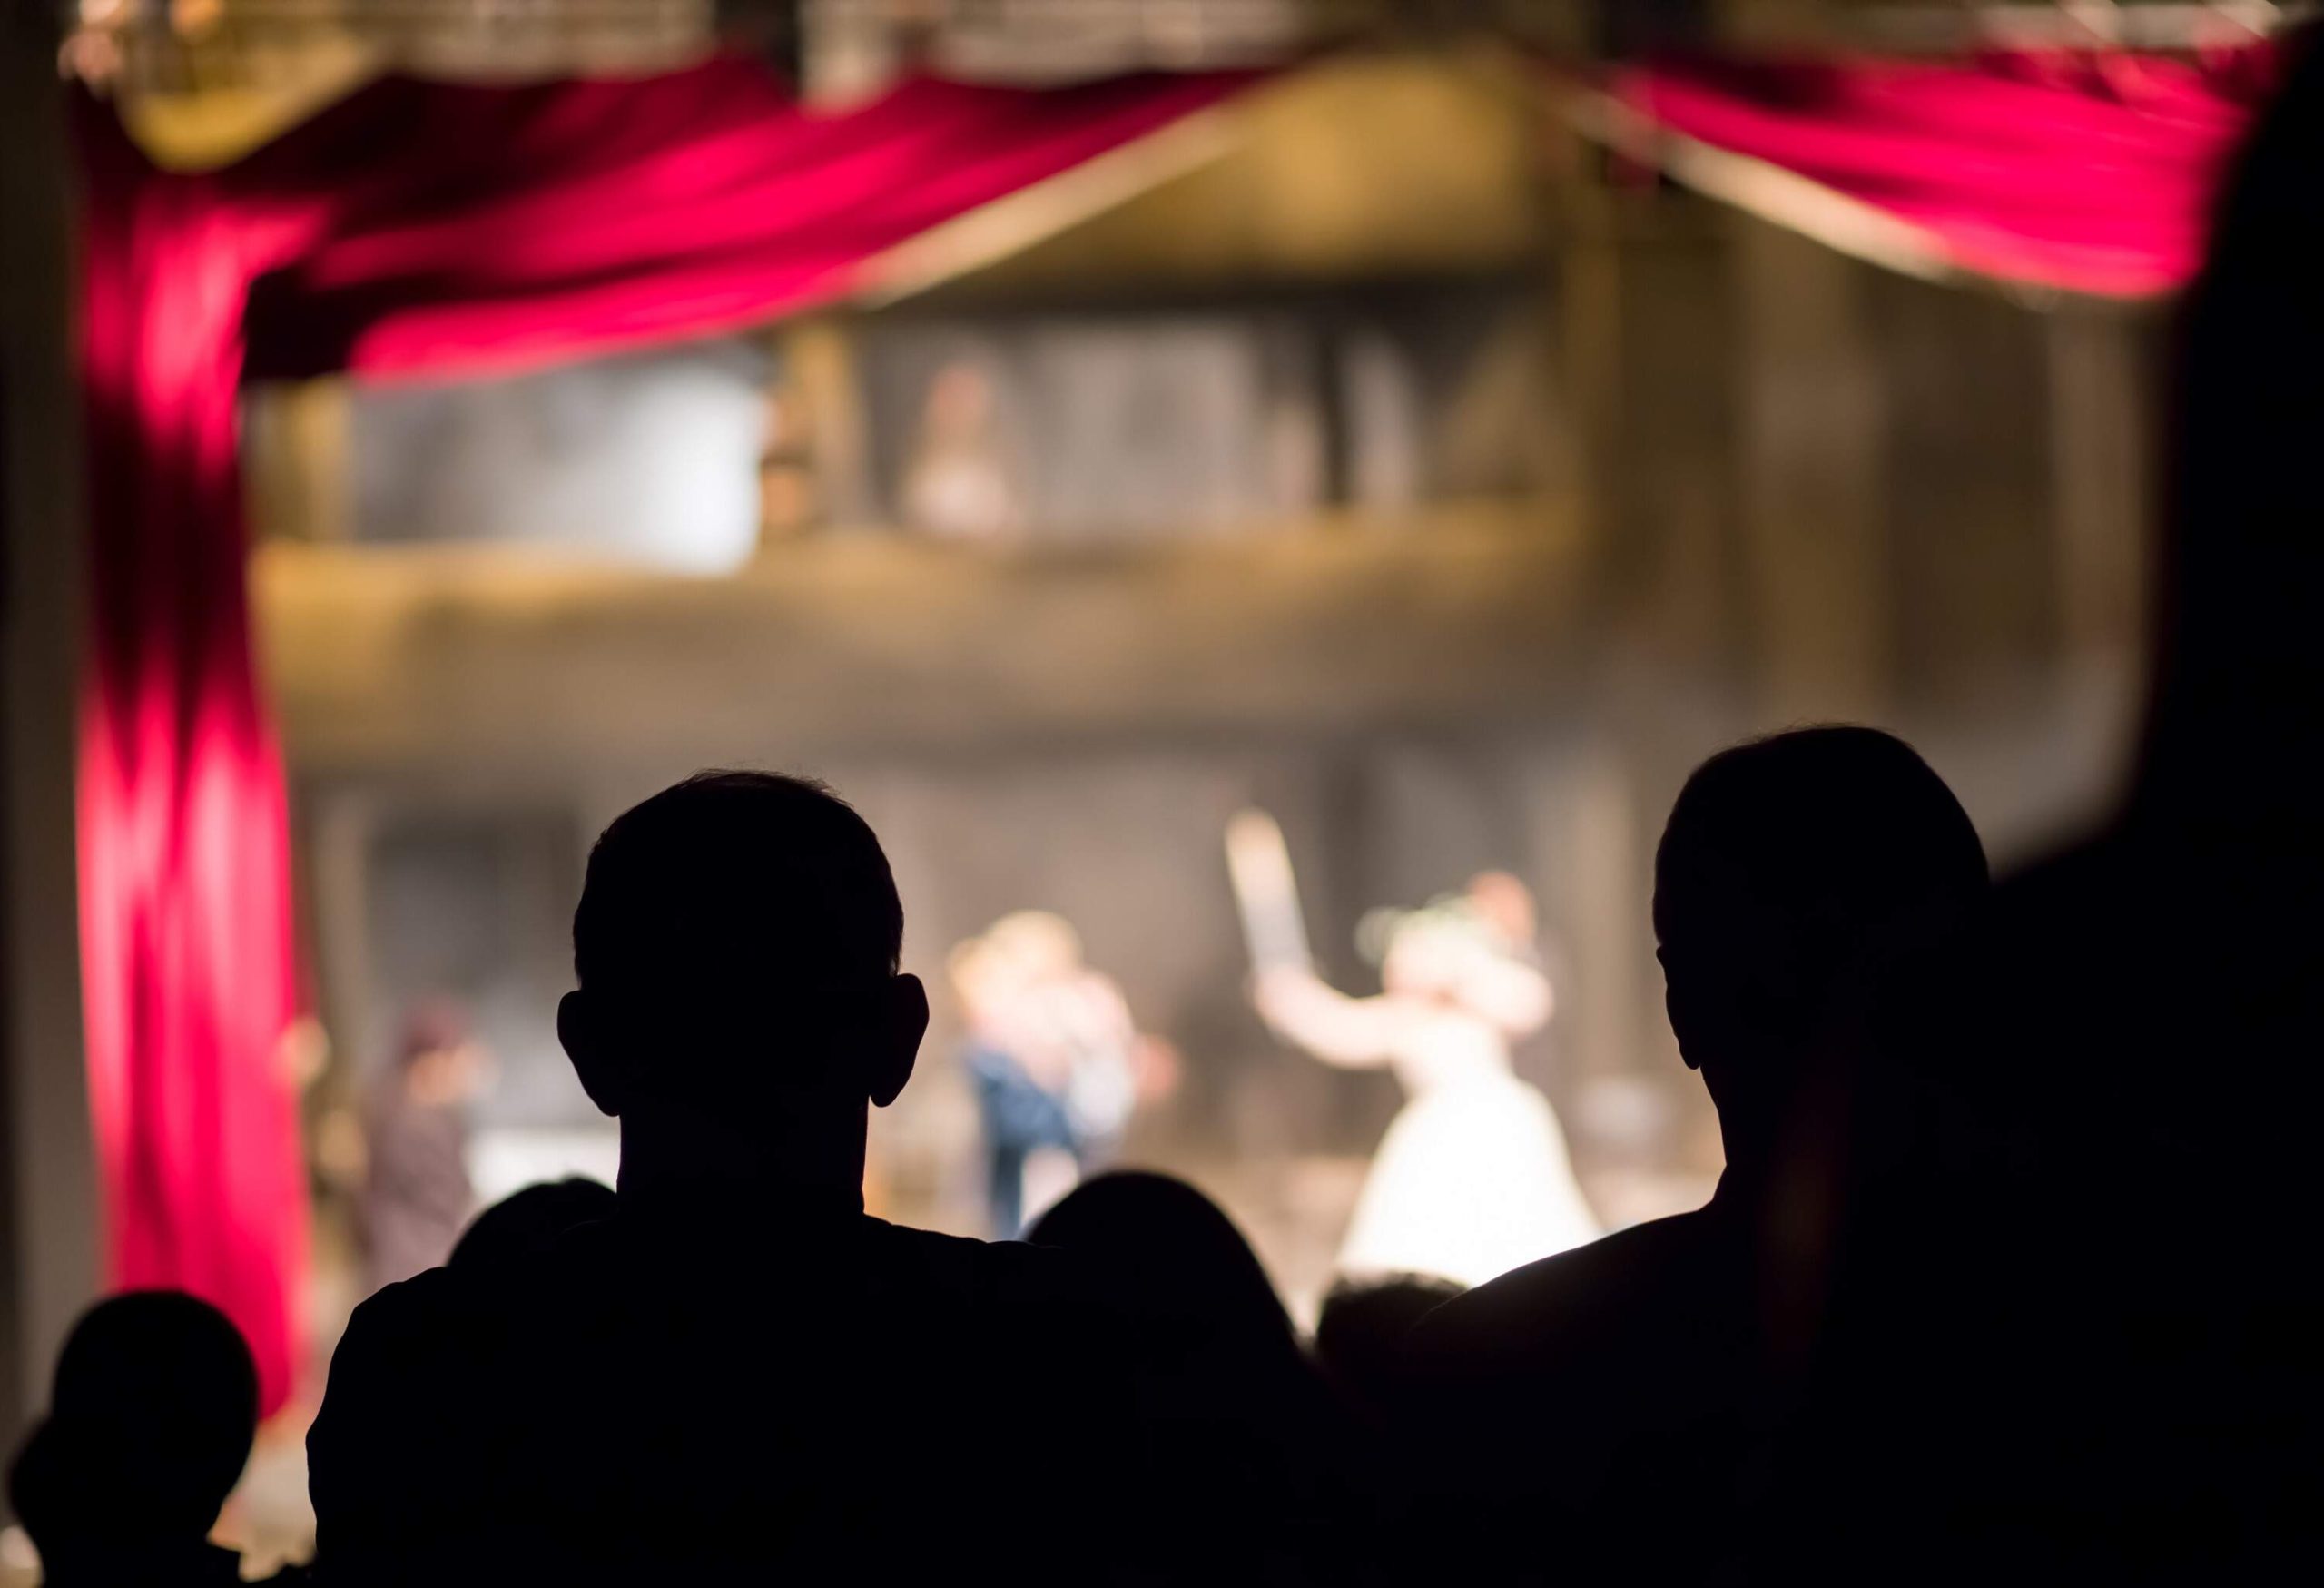 The silhouette of people is visible as they eagerly watch a performance on stage.